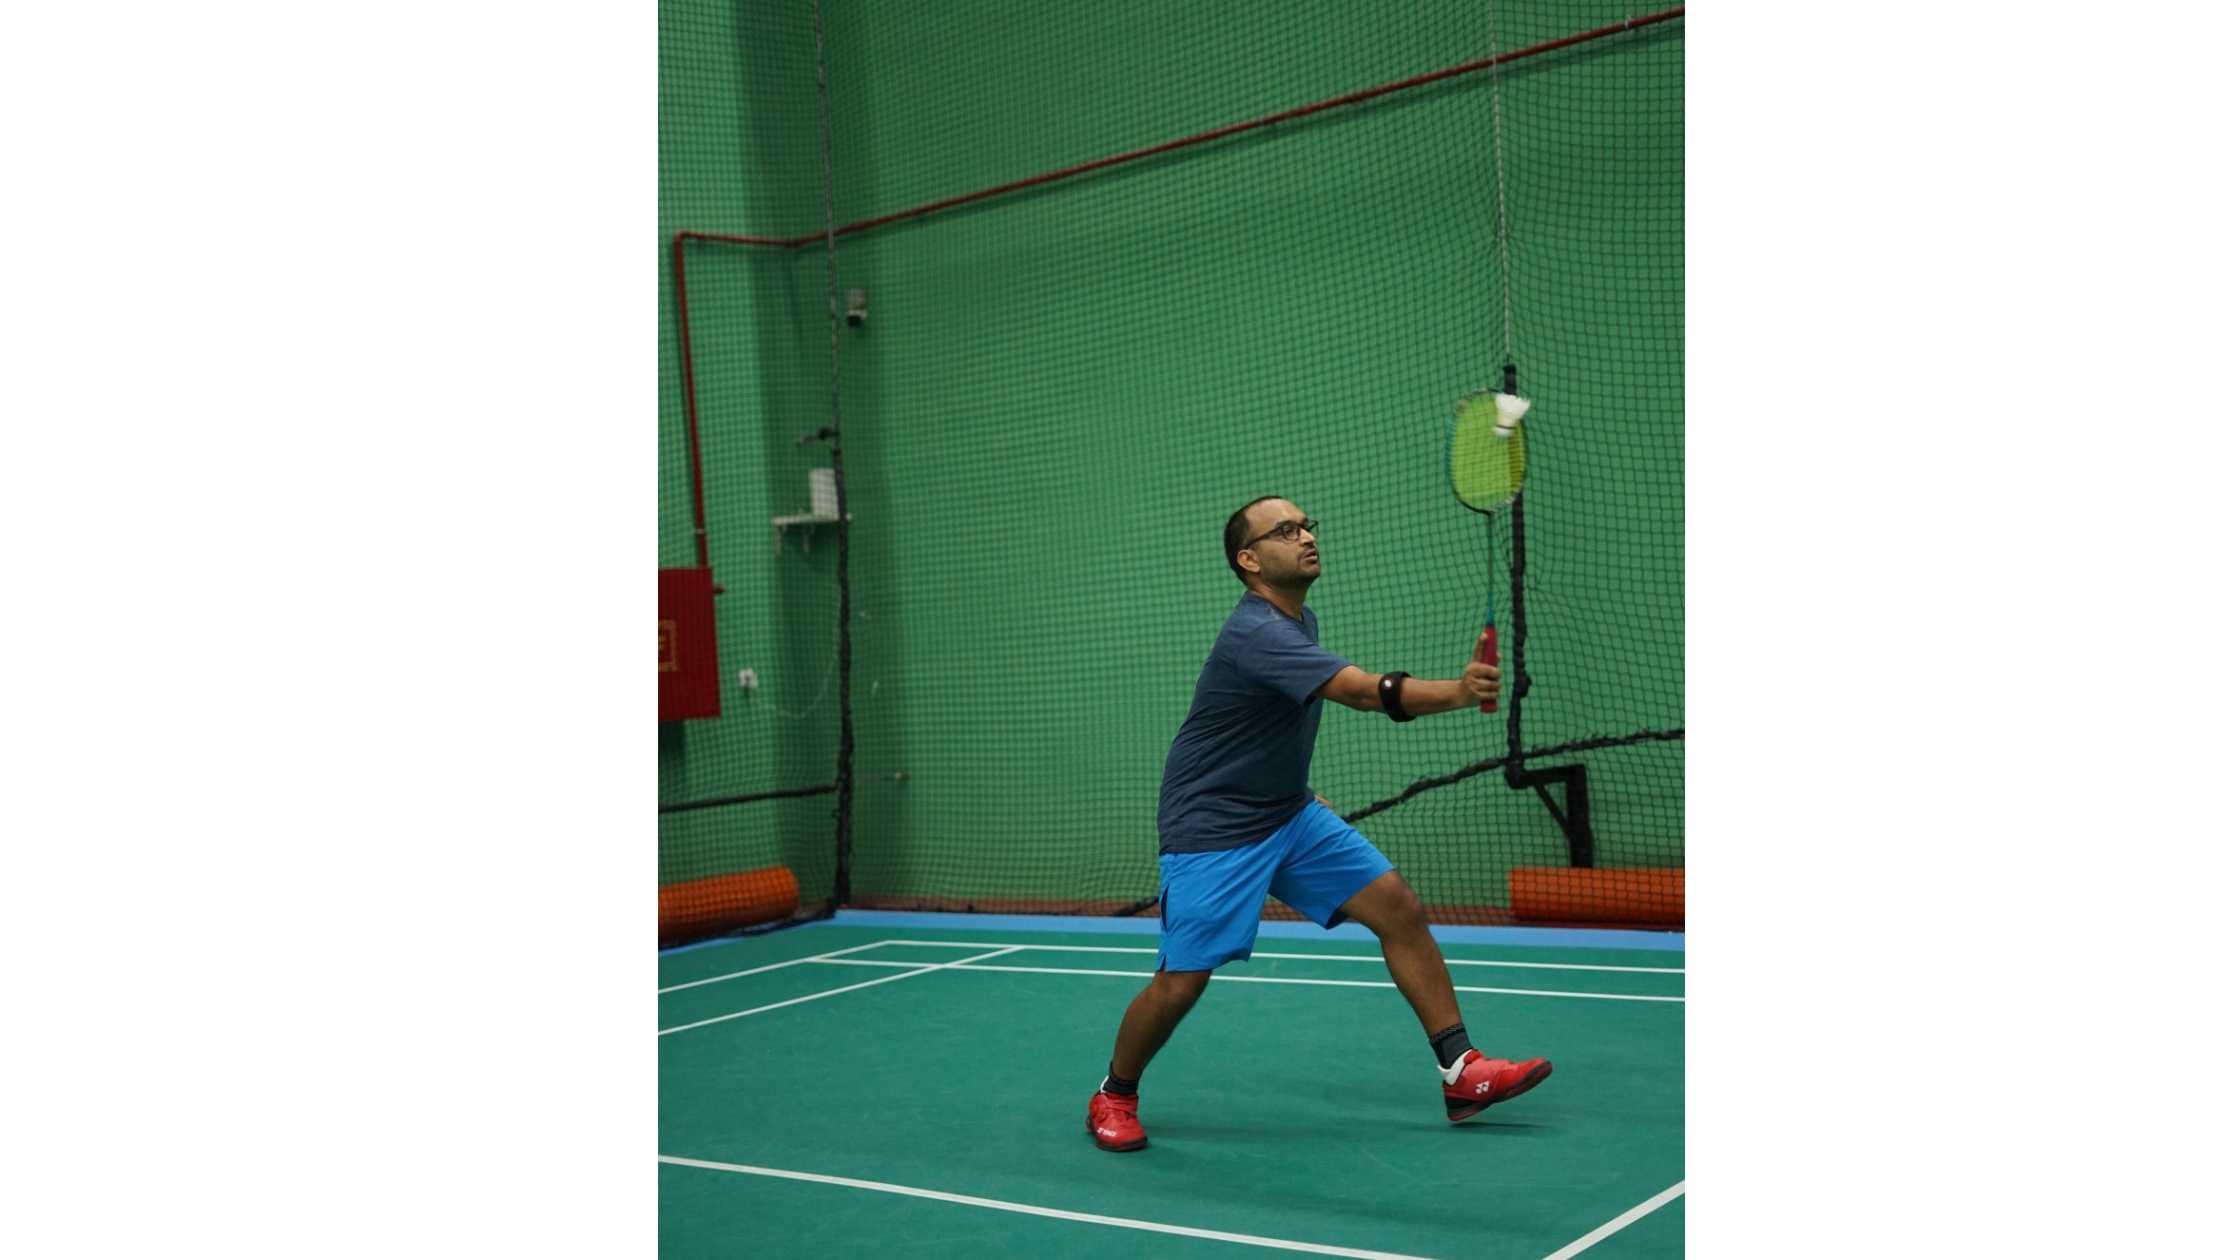 Want to Improve Your Badminton Game? Discover How with Our Premier Coaching in Dubai1. The Importance of Professional Badminton Coaching in Dubai